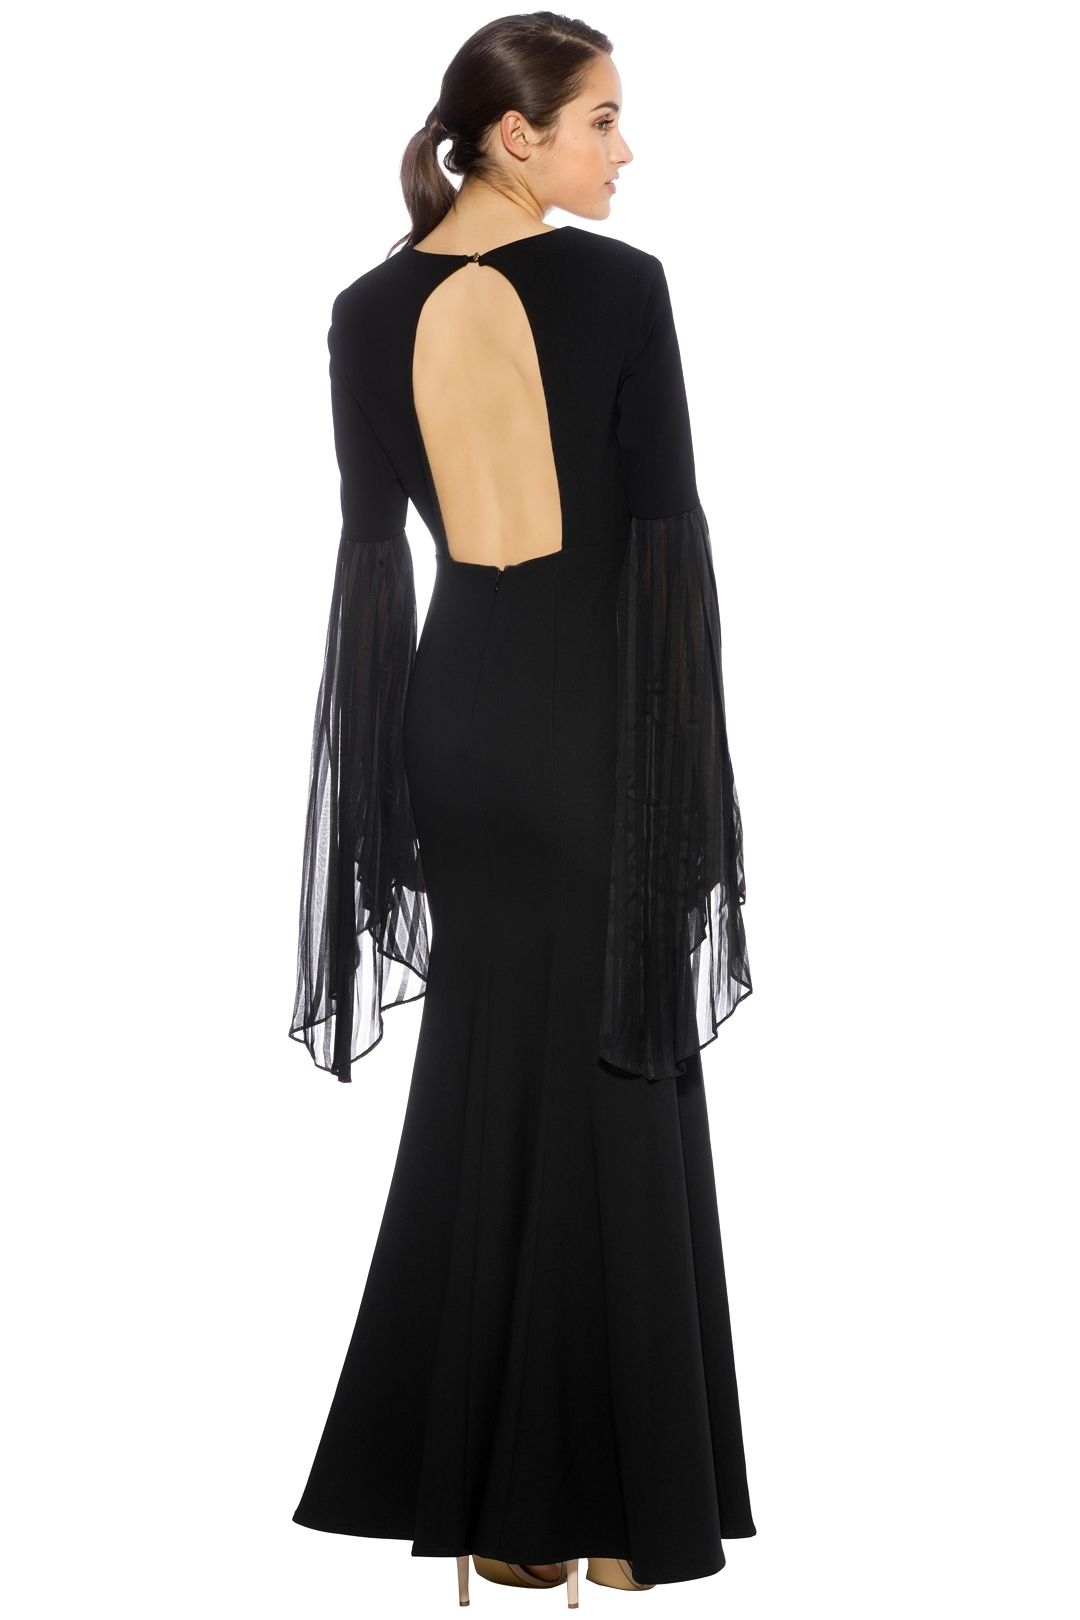 Talulah - Cirso Flared Sleeve Gown - Black - Back